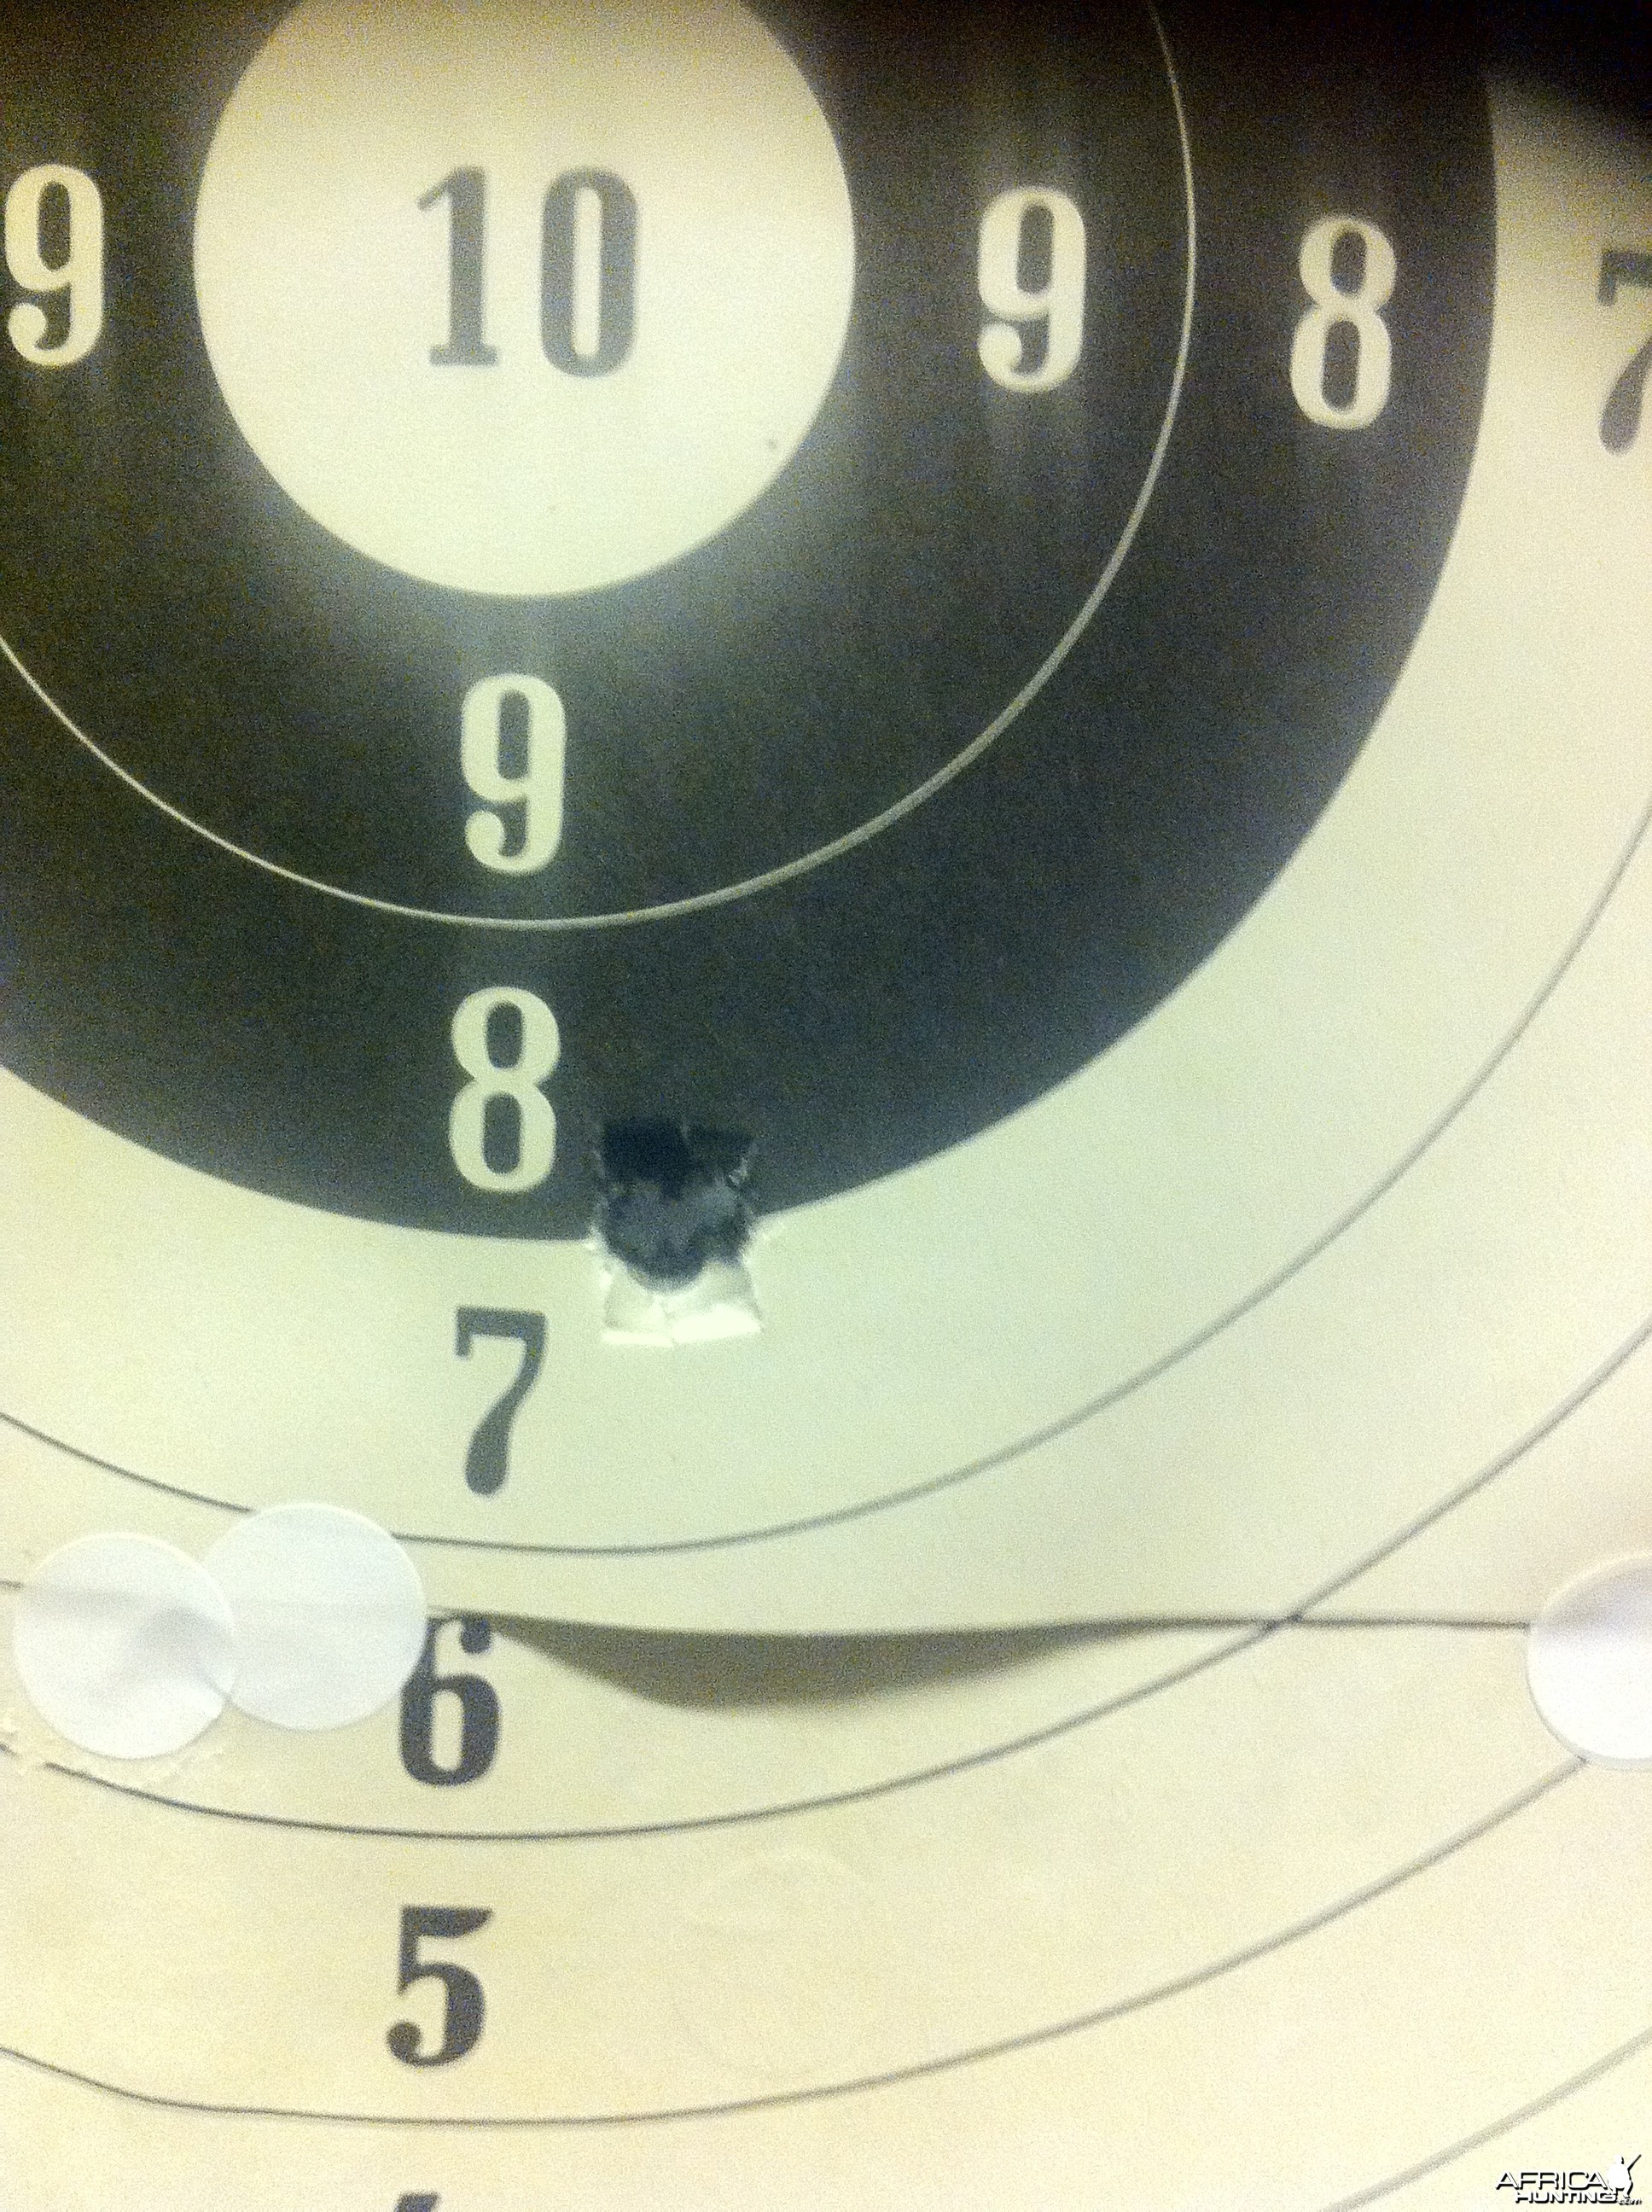 Three shots-- bullet picture